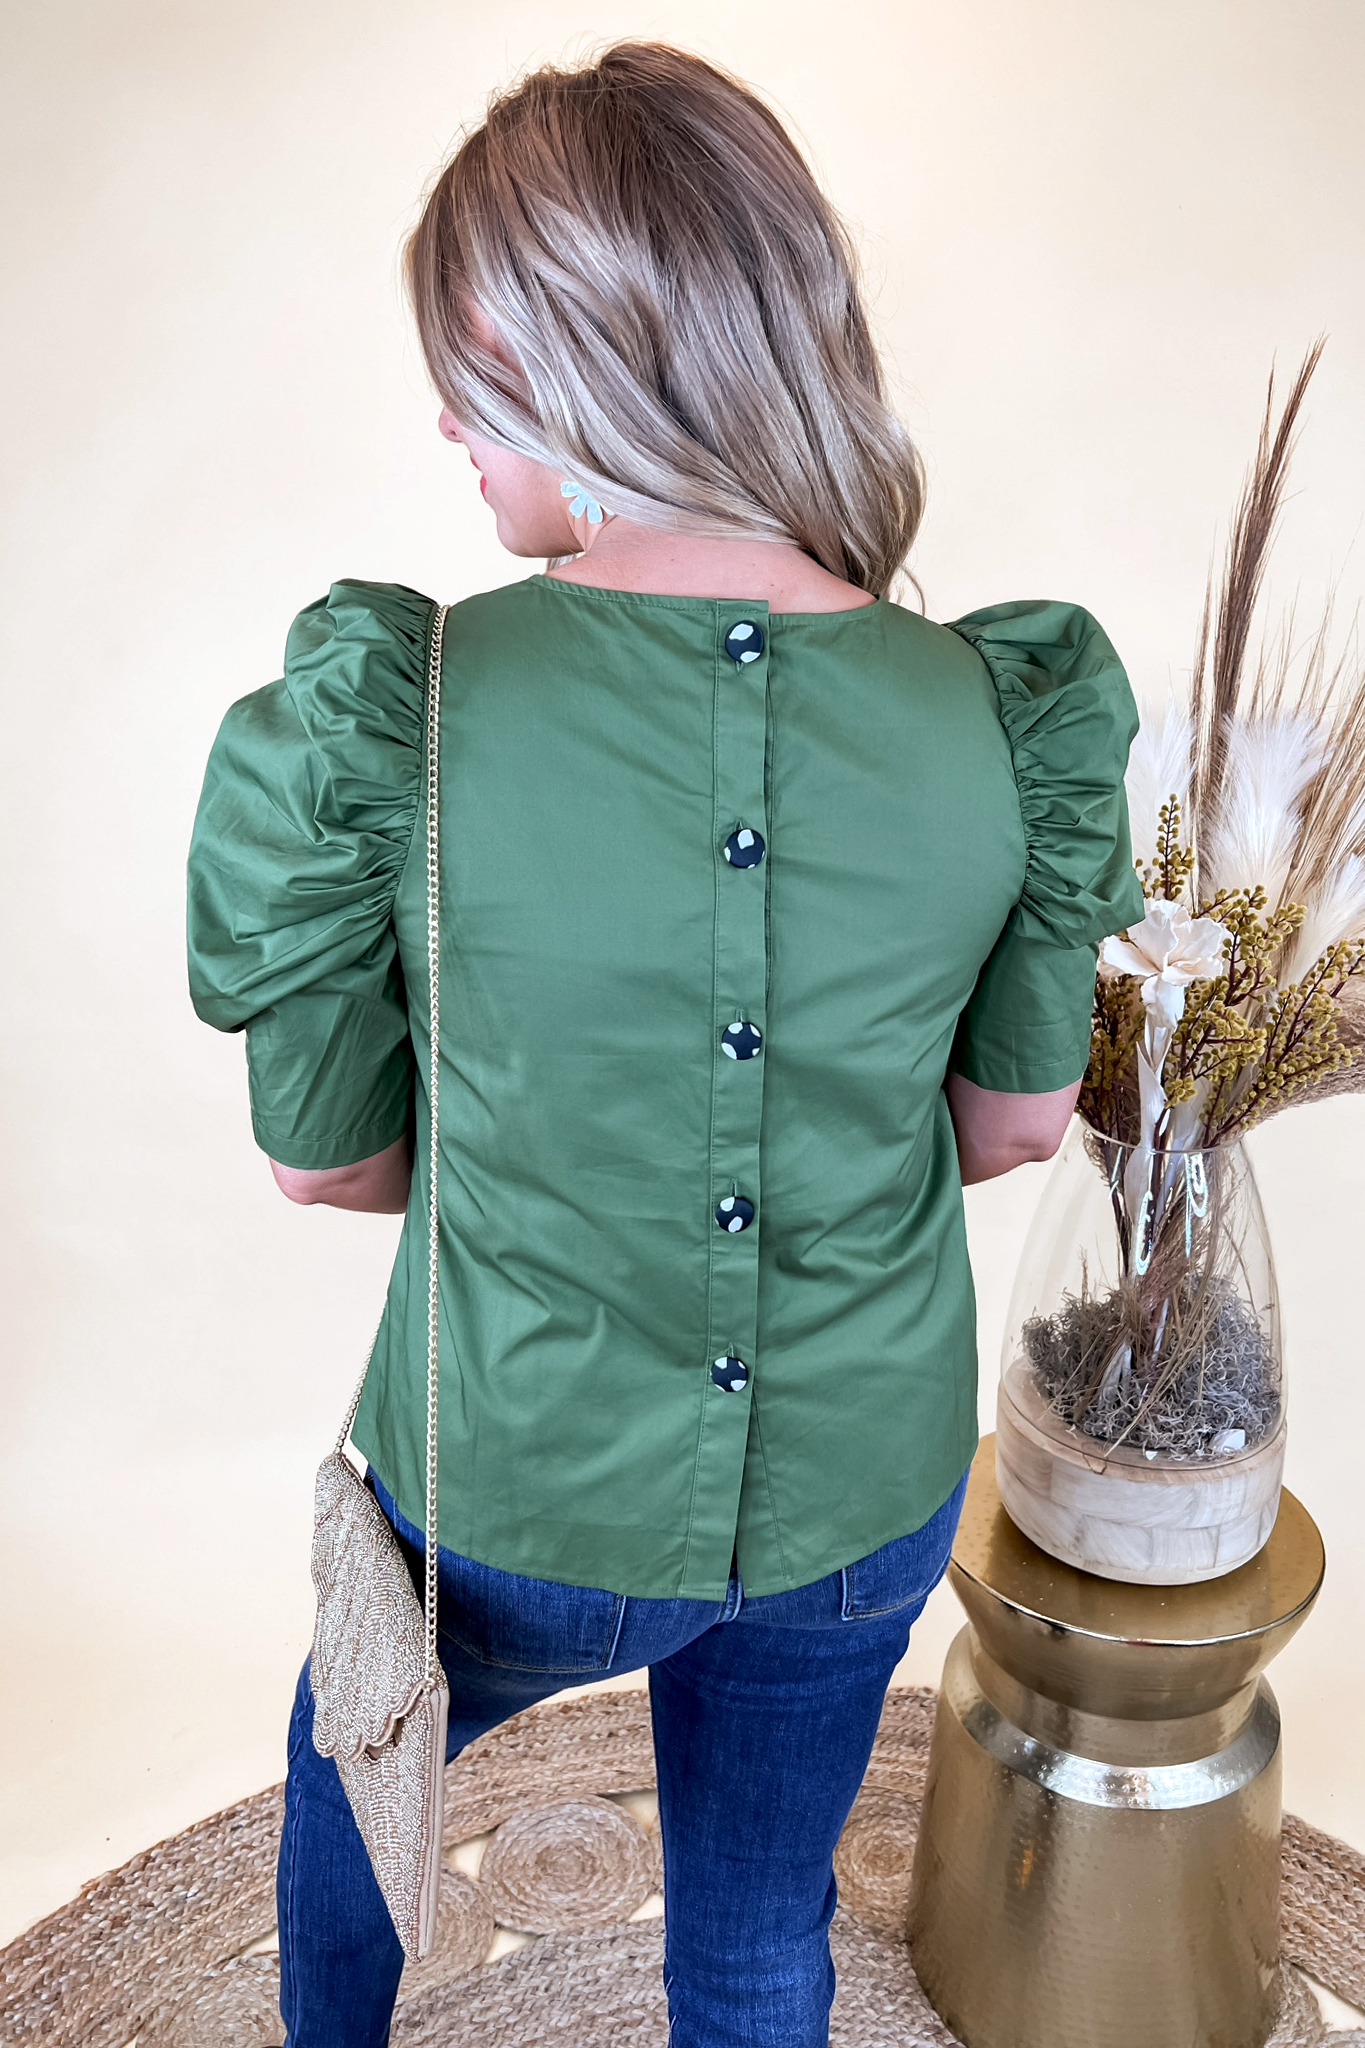 The Rudy Top in Olive by Crosby